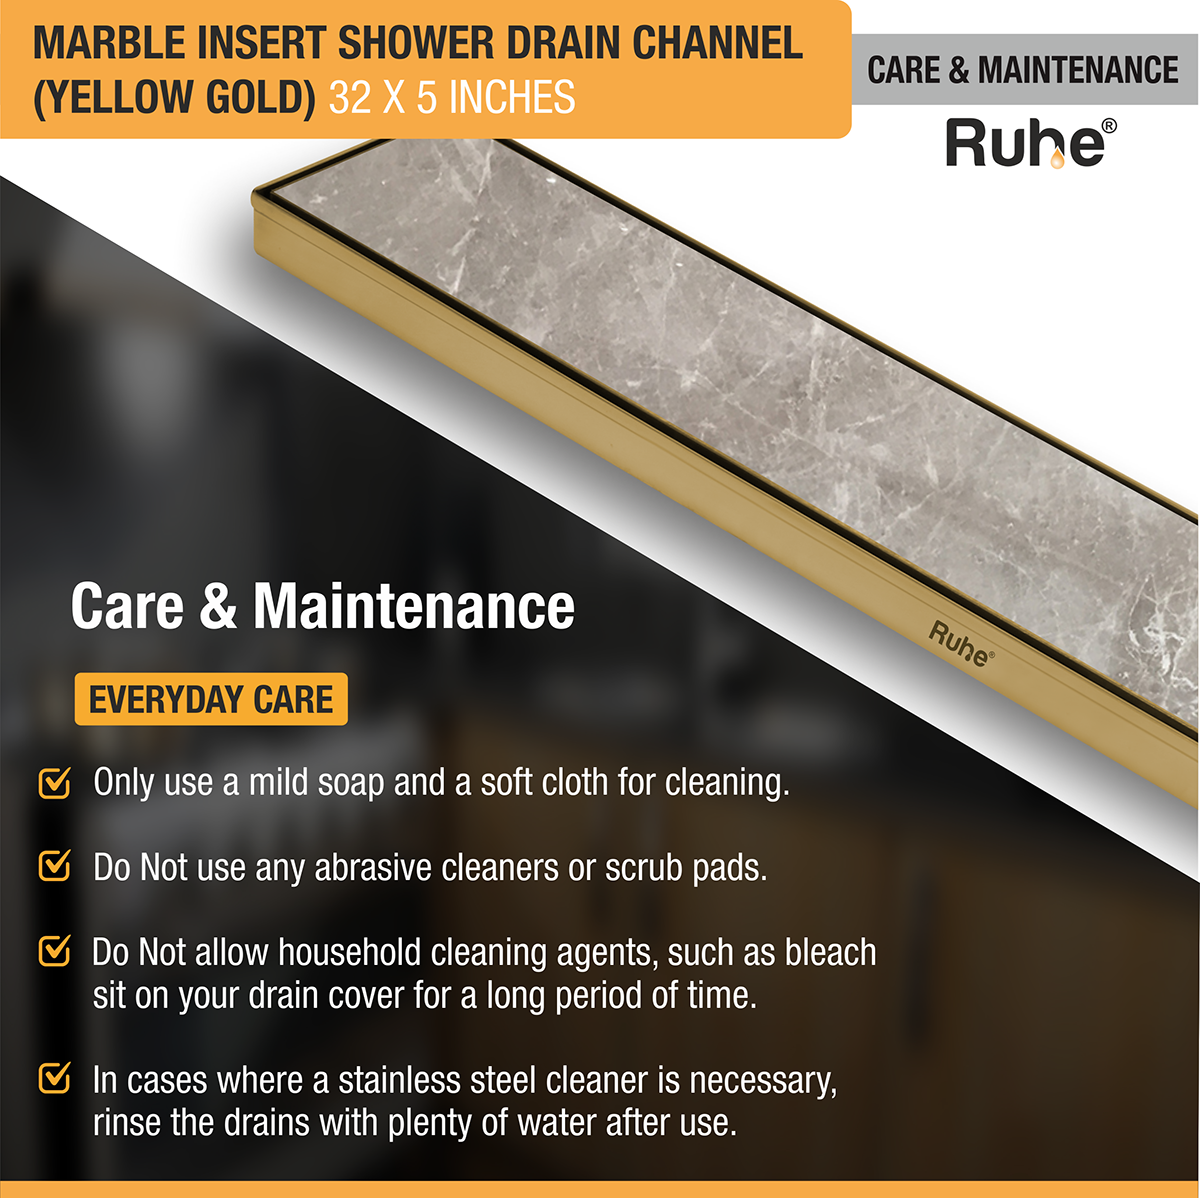 Marble Insert Shower Drain Channel (32 x 5 Inches) YELLOW GOLD PVD Coated care and maintenance